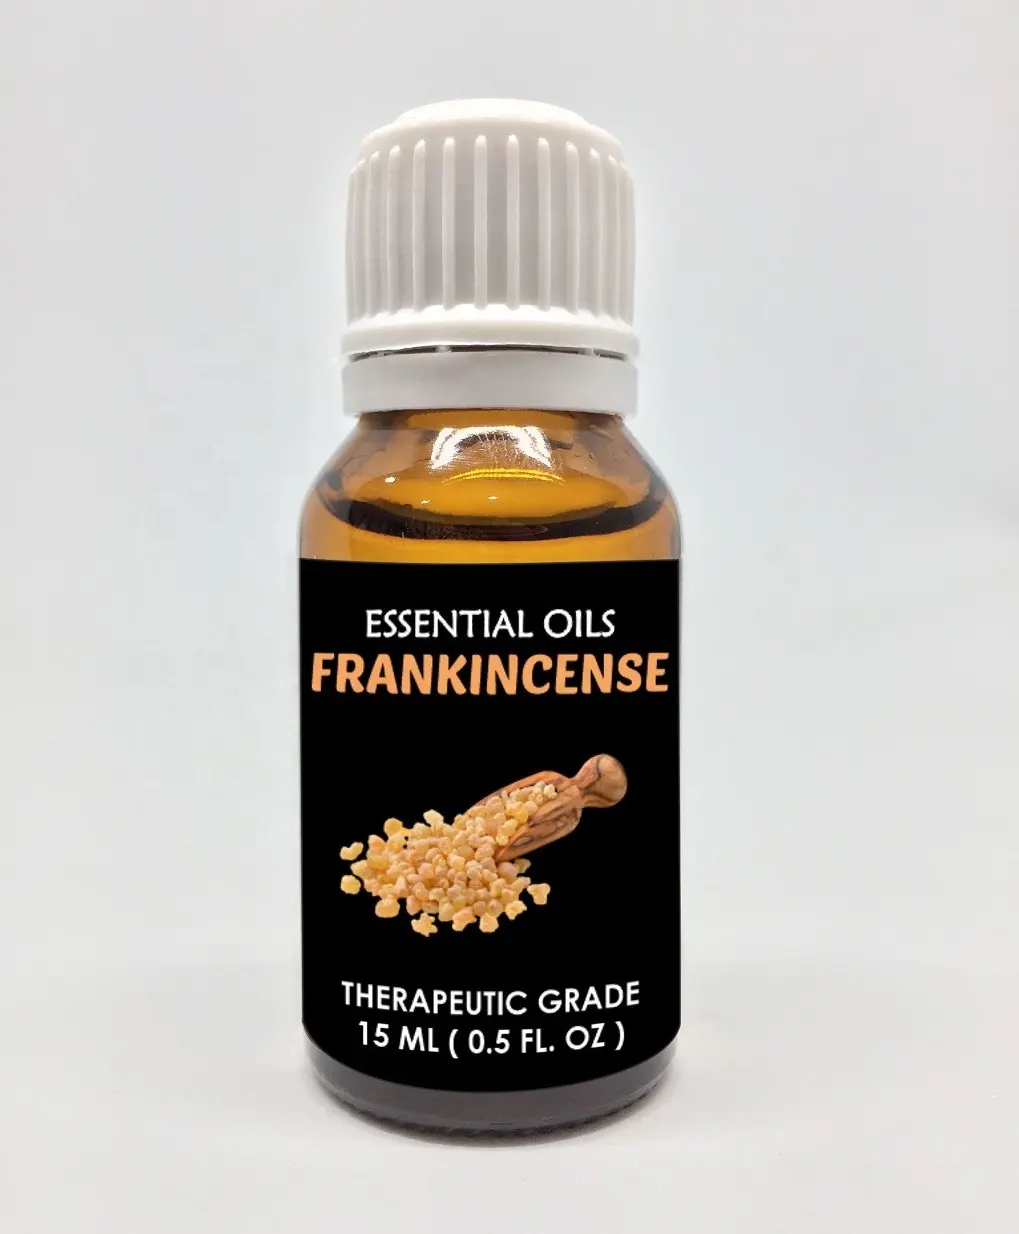 Pure Frankincense Essential Oil at Low Price on Bulk Purchase